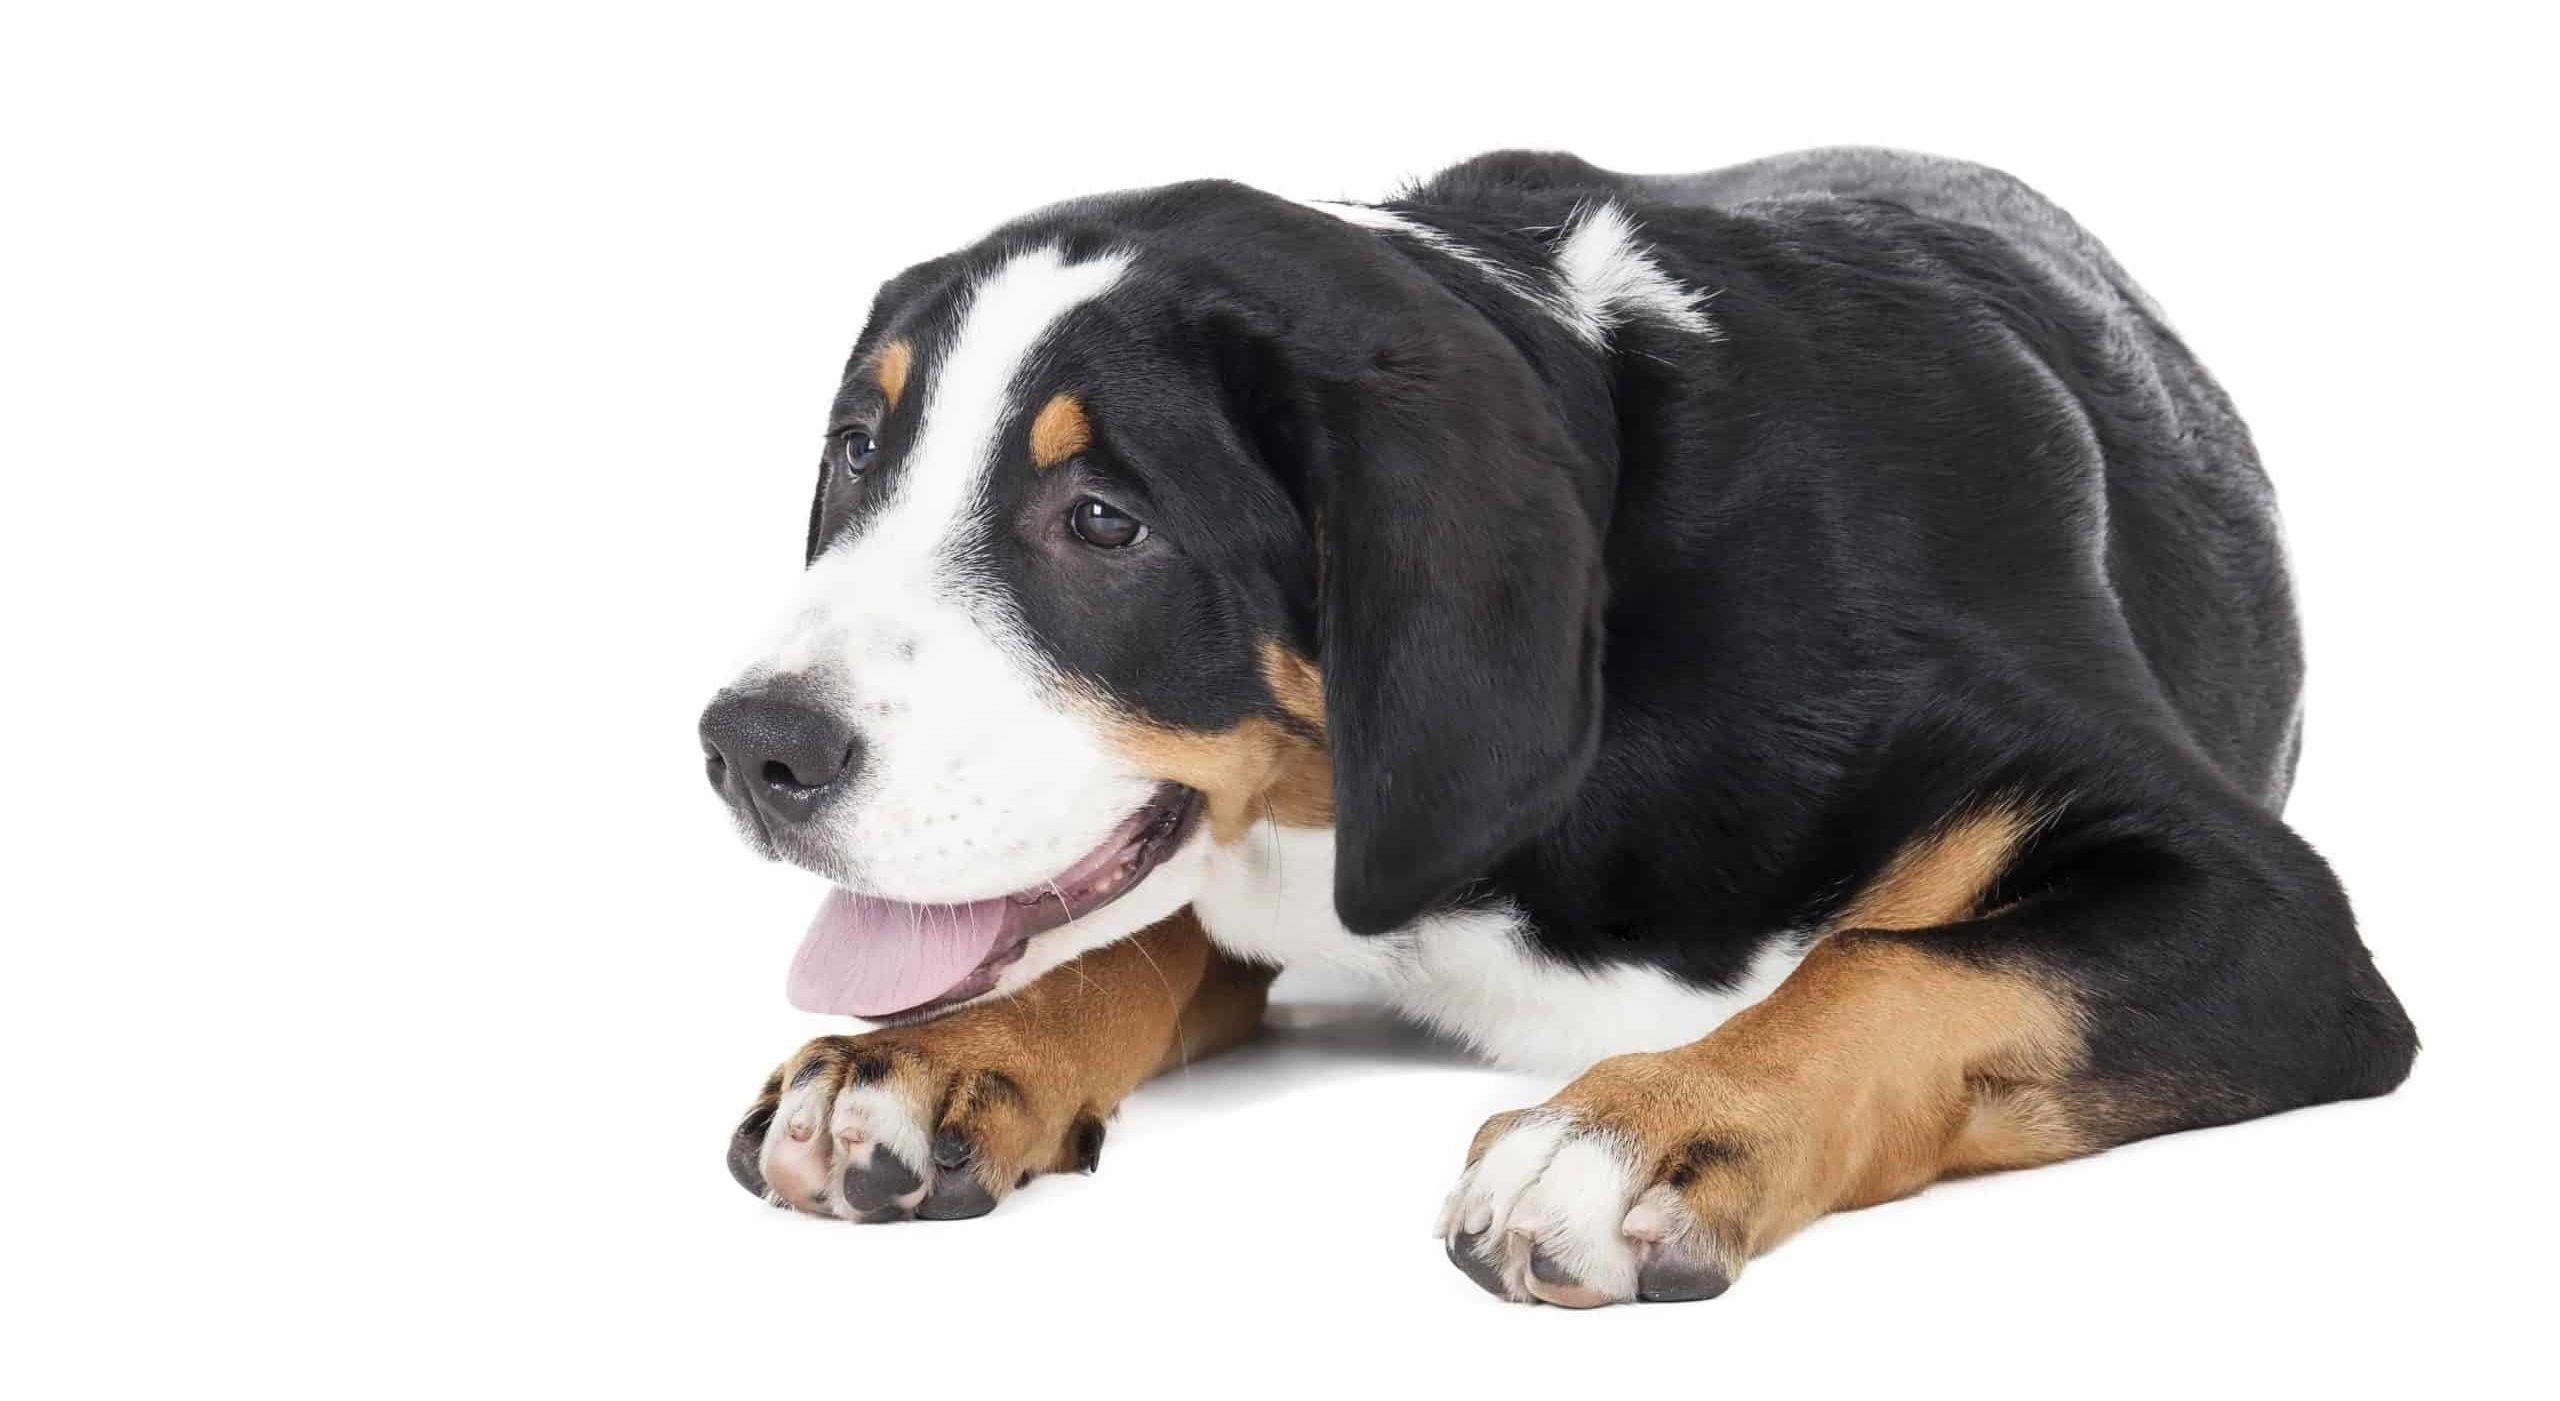 Greater Swiss Mountain Dog on white background. Swiss Mountain Dogs have a shiny, one-length, long coat to protect them from the cold.